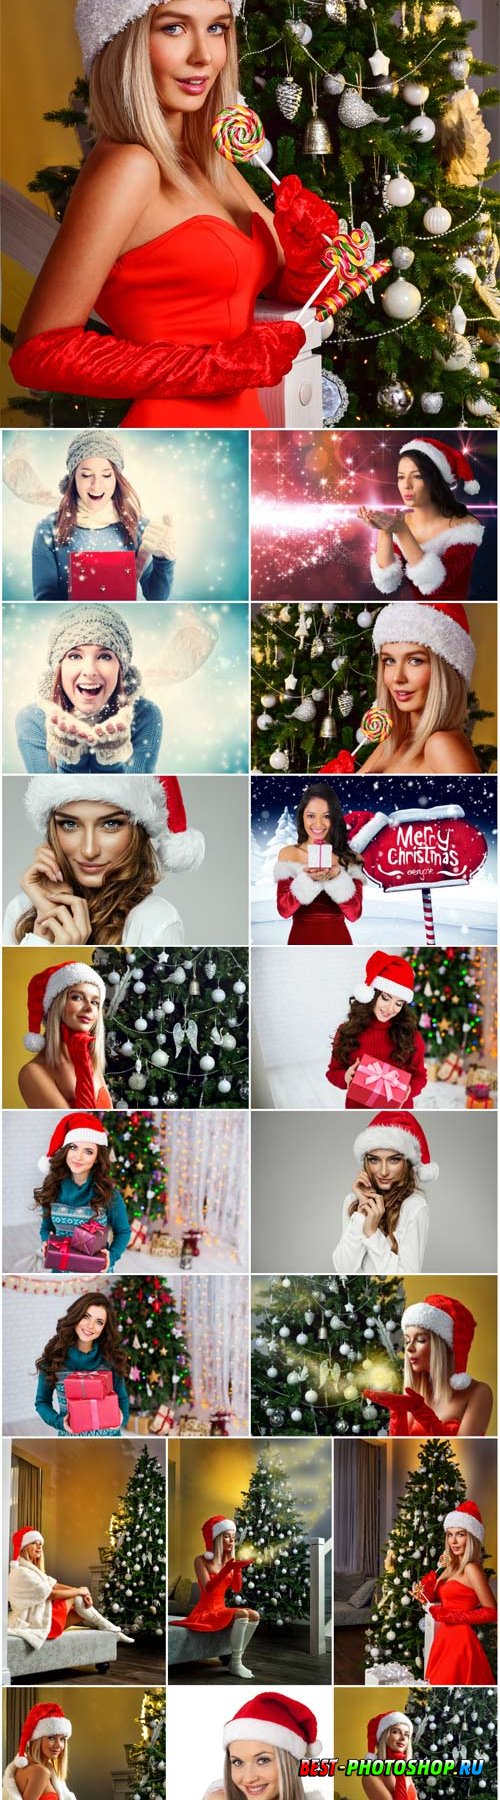 New Year and Christmas stock photos 61